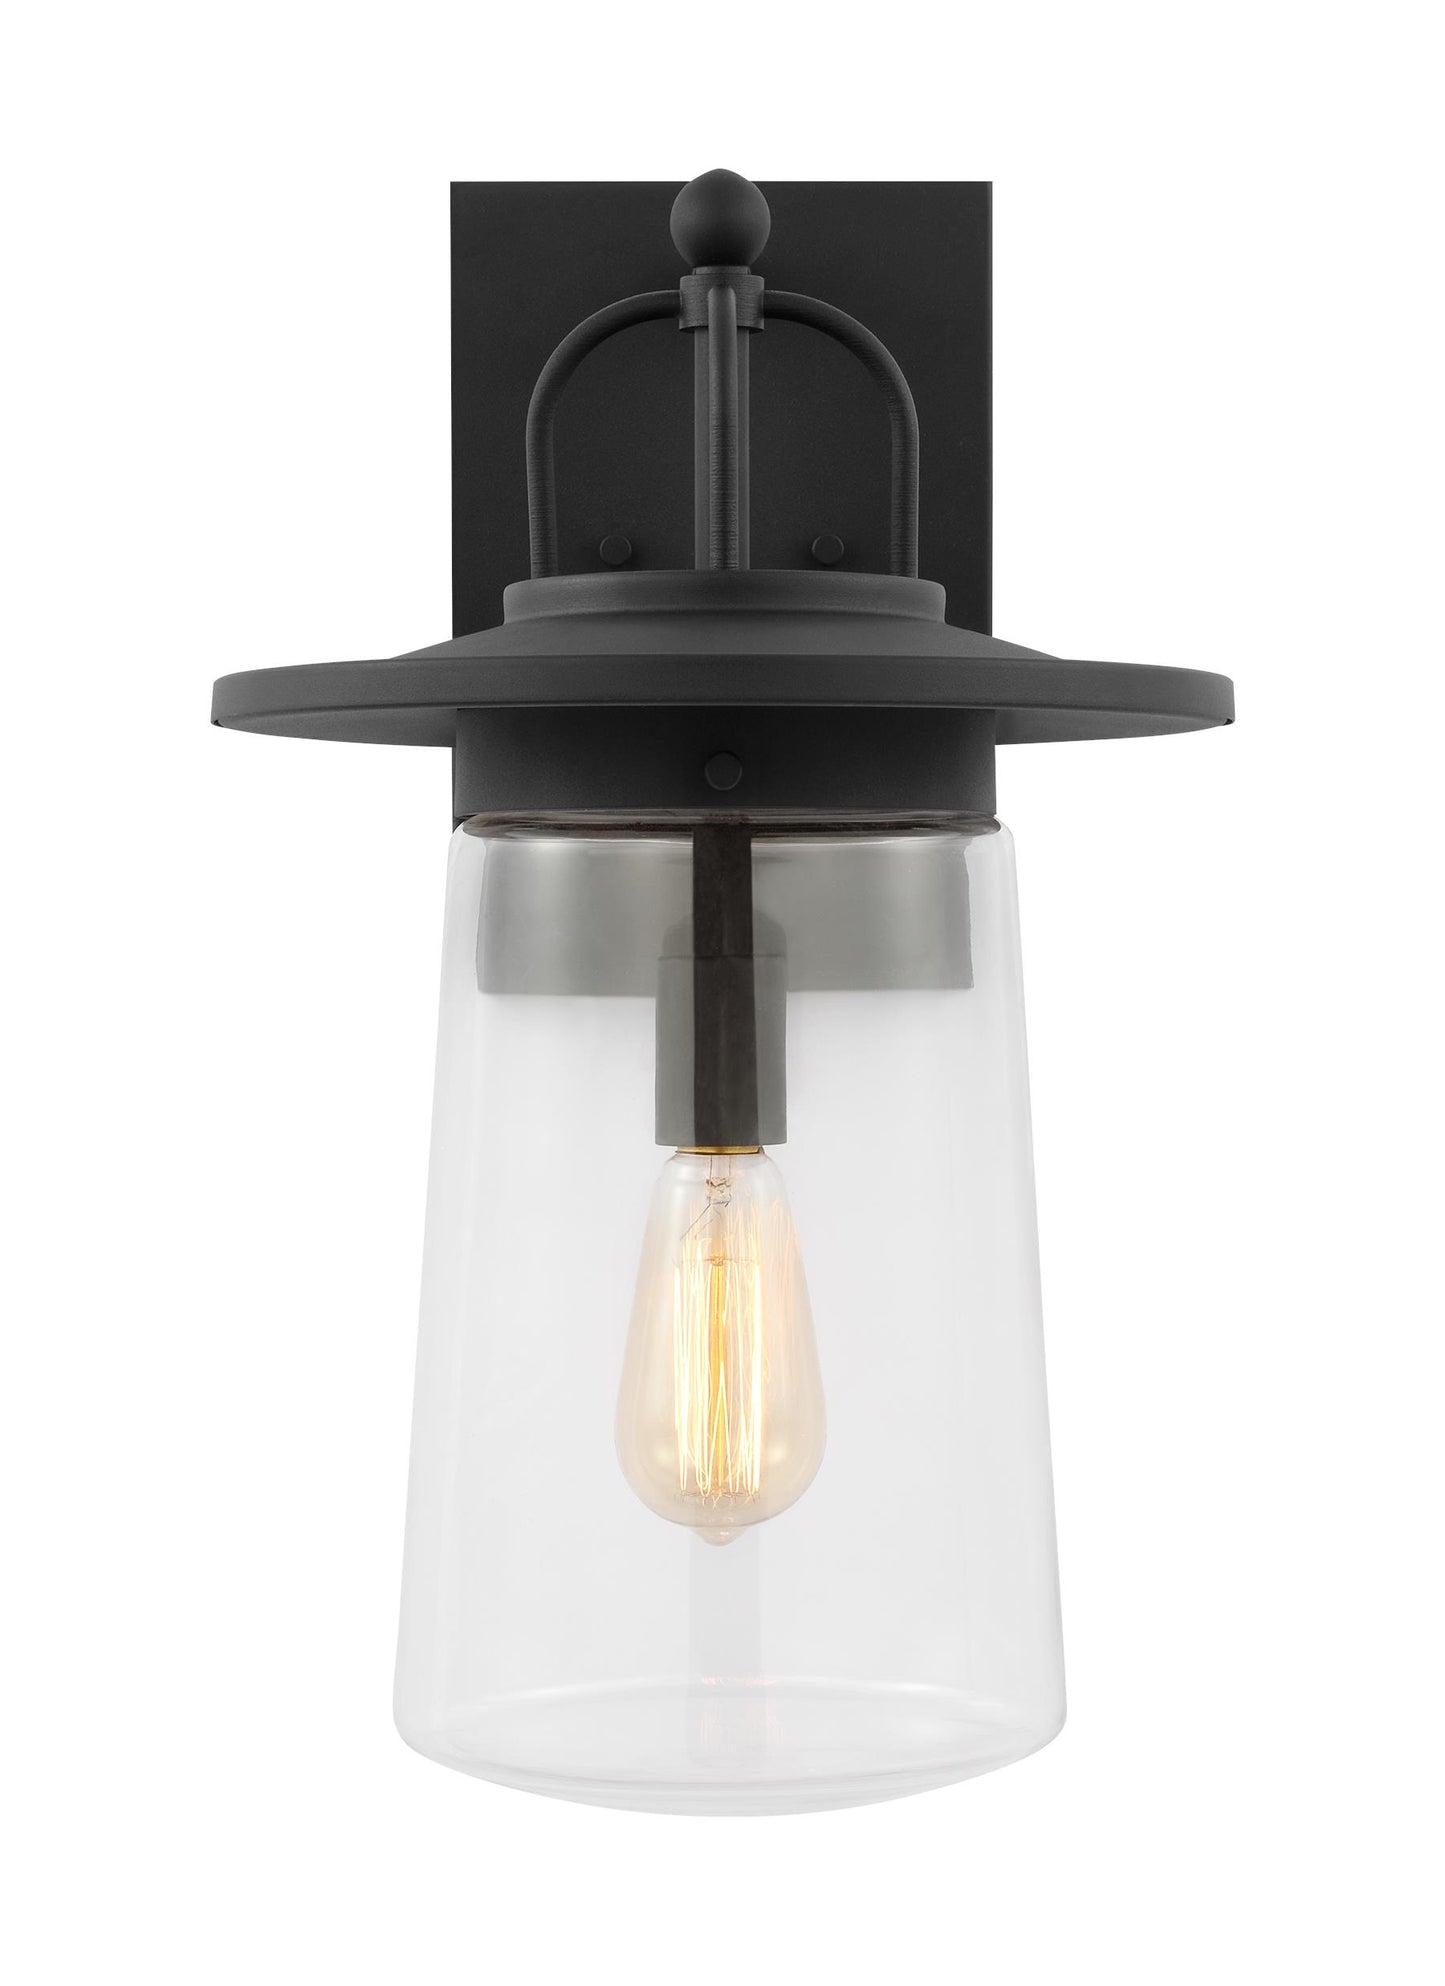 Tybee traditional 1-light outdoor exterior large wall lantern in black finish with clear glass shade